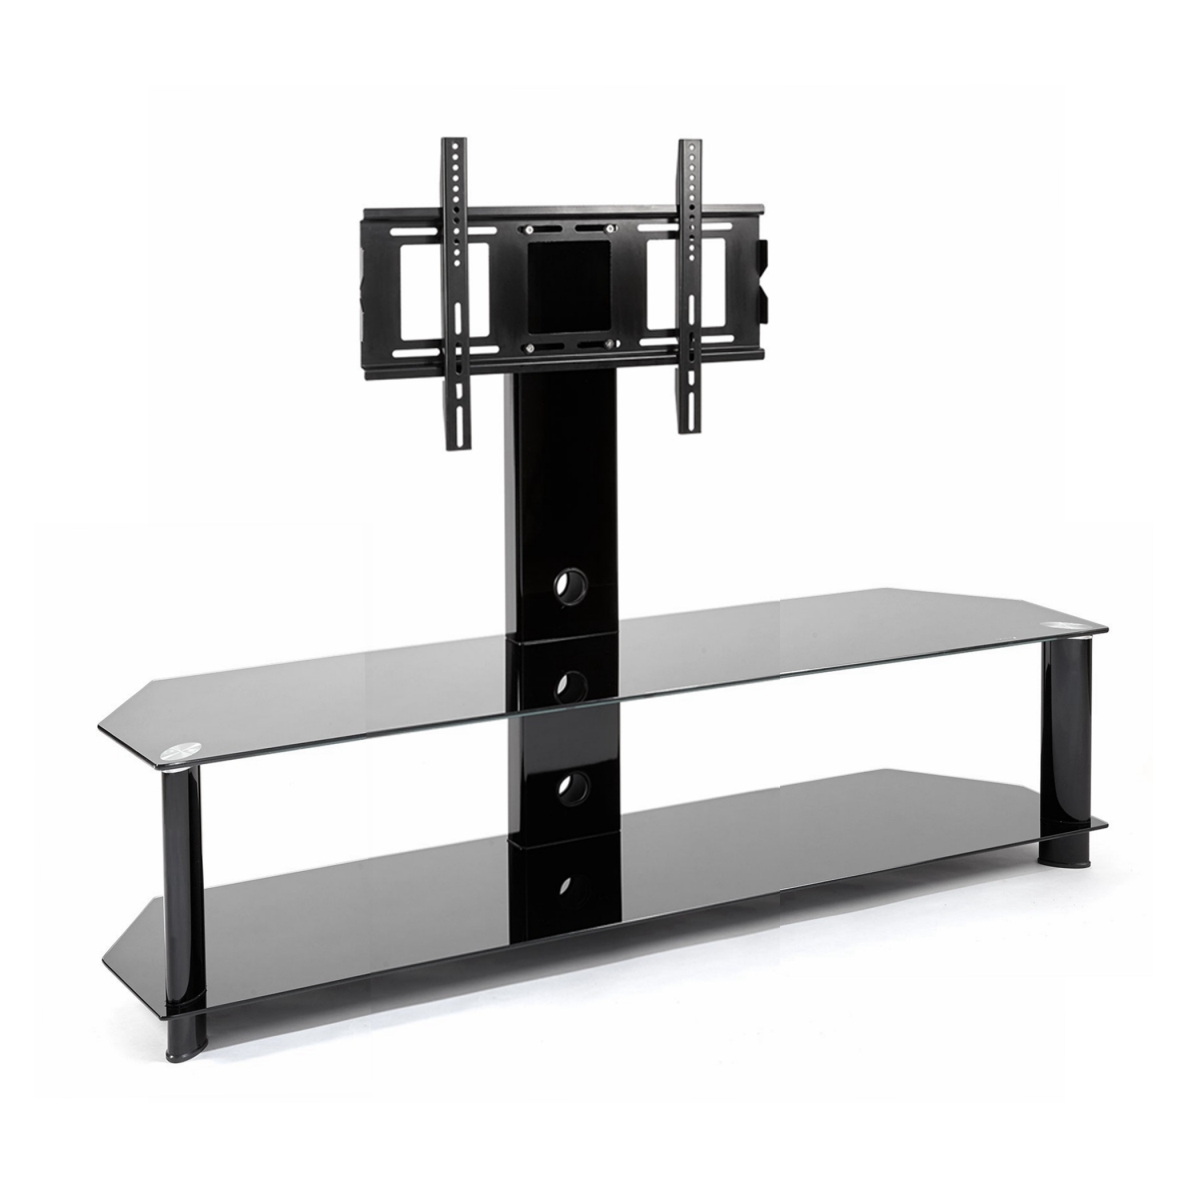 Lcd8006blk Tv Stand For 37-60 In. Flat Panel Tv, Black